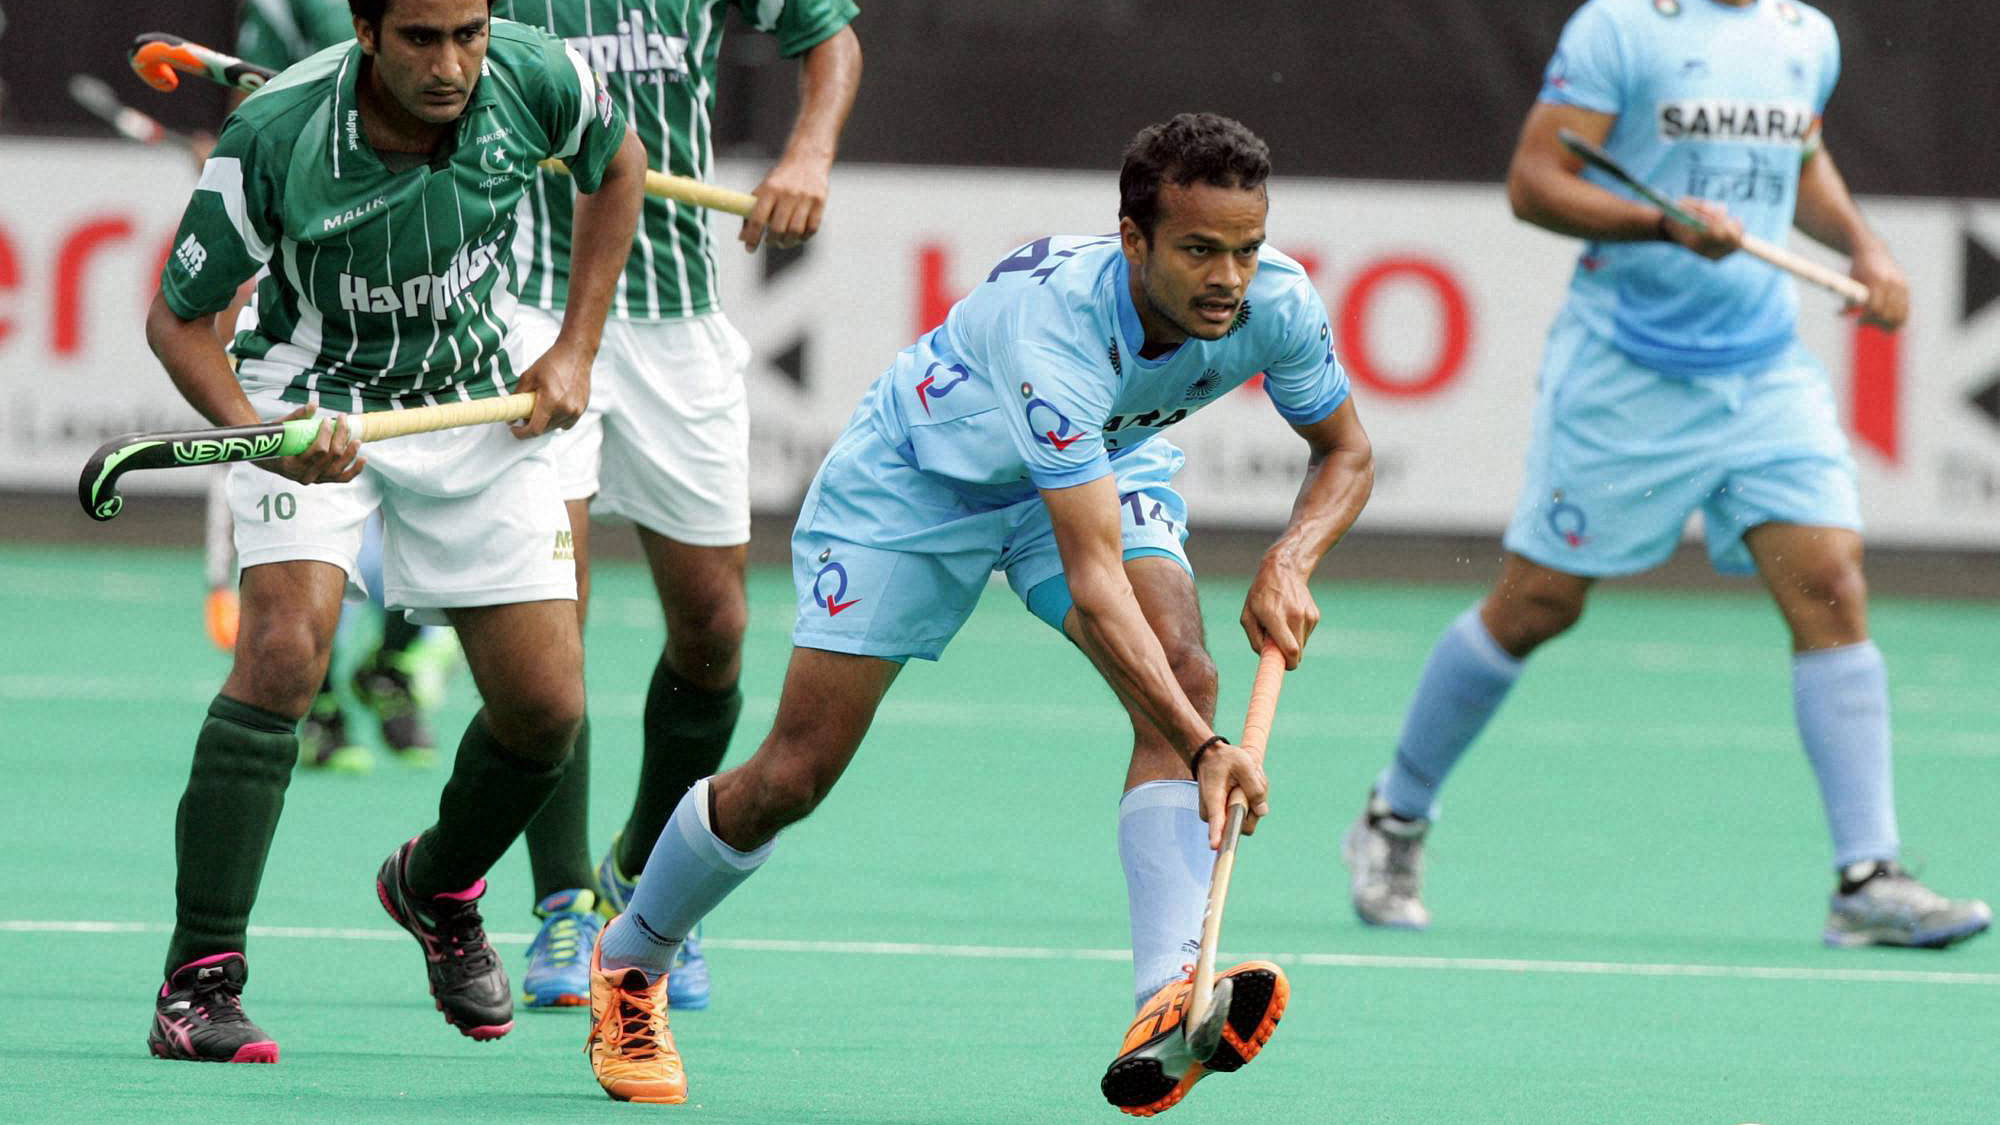  India’s Upadhyay Lalit vies for the ball  during the mens Hockey World League semi-finals against Pakistan. (Photo: PTI)